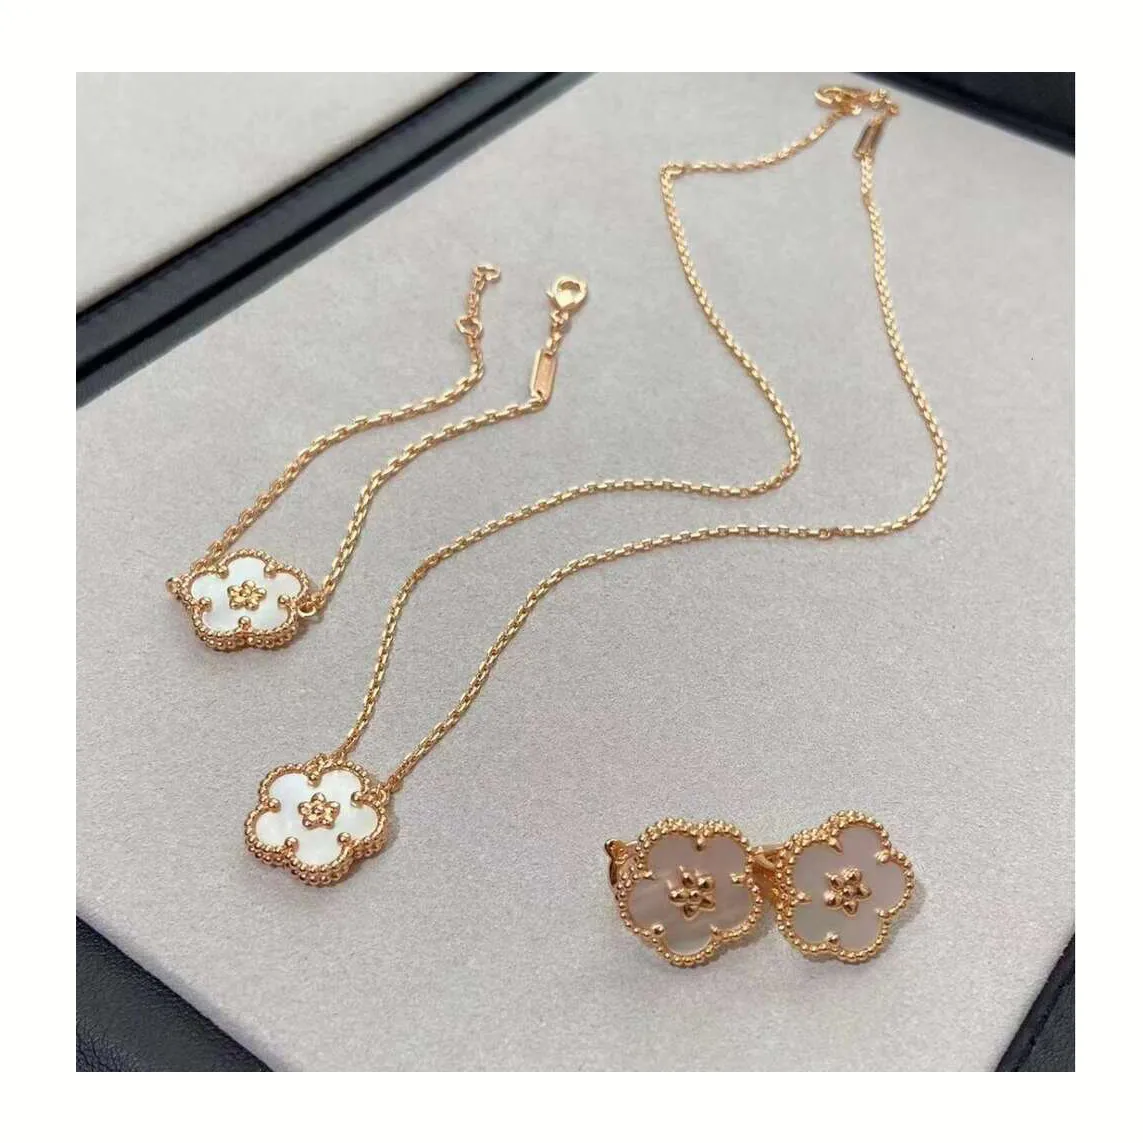 Designer Earrings 4/four Leaf Clover Charm High quality Plum Blossom Necklace Bracelet women 925 sterling silver Rose Gold White Fritillaria Clavicle chain Jewelry